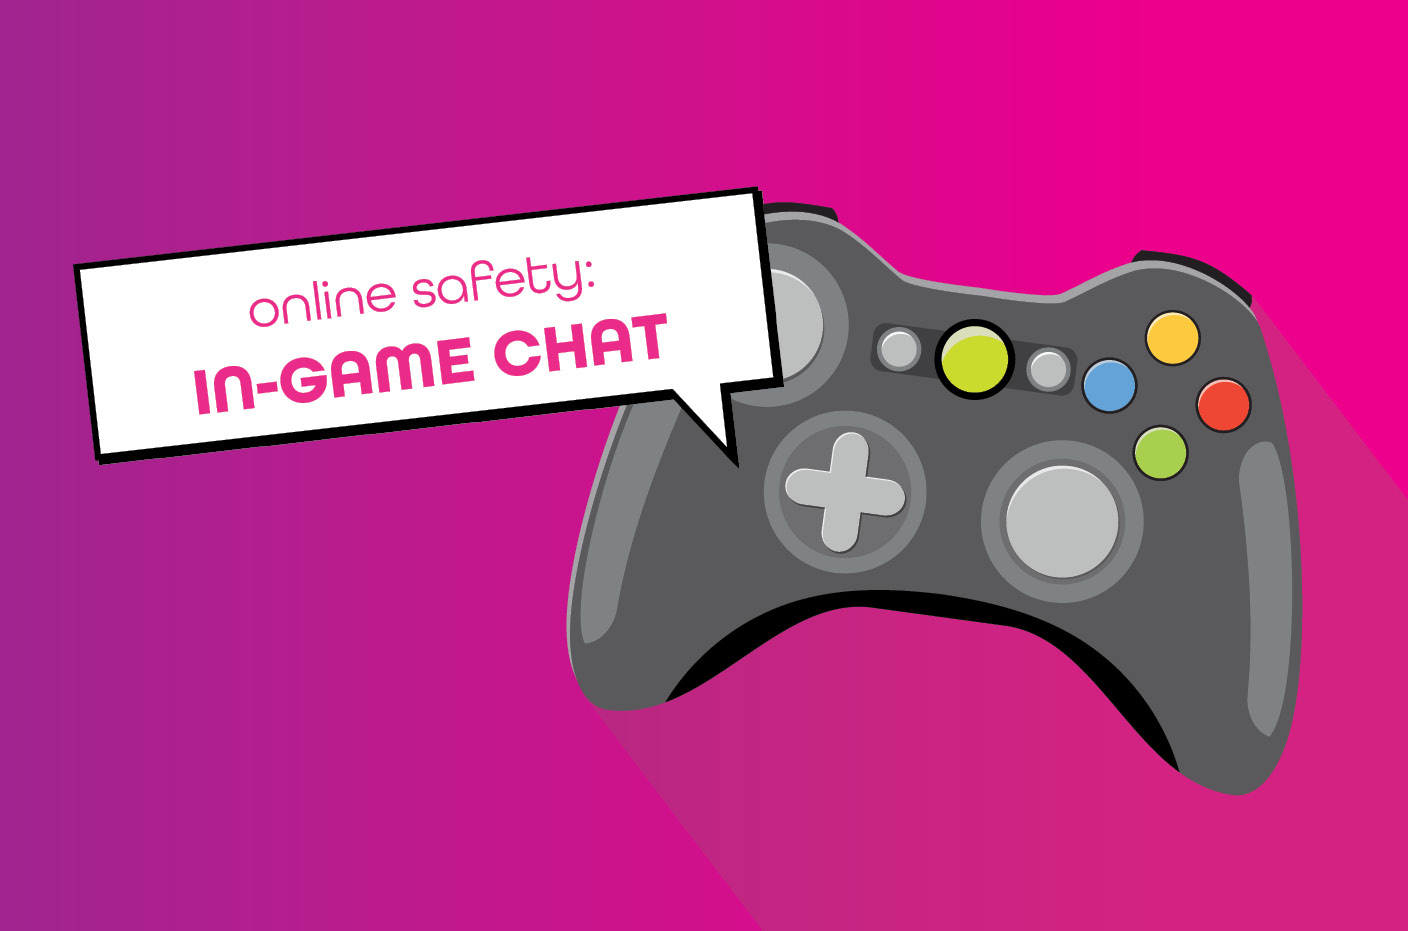 Online Safety: In-game chat • Stacey Miller Consultancy | Substance